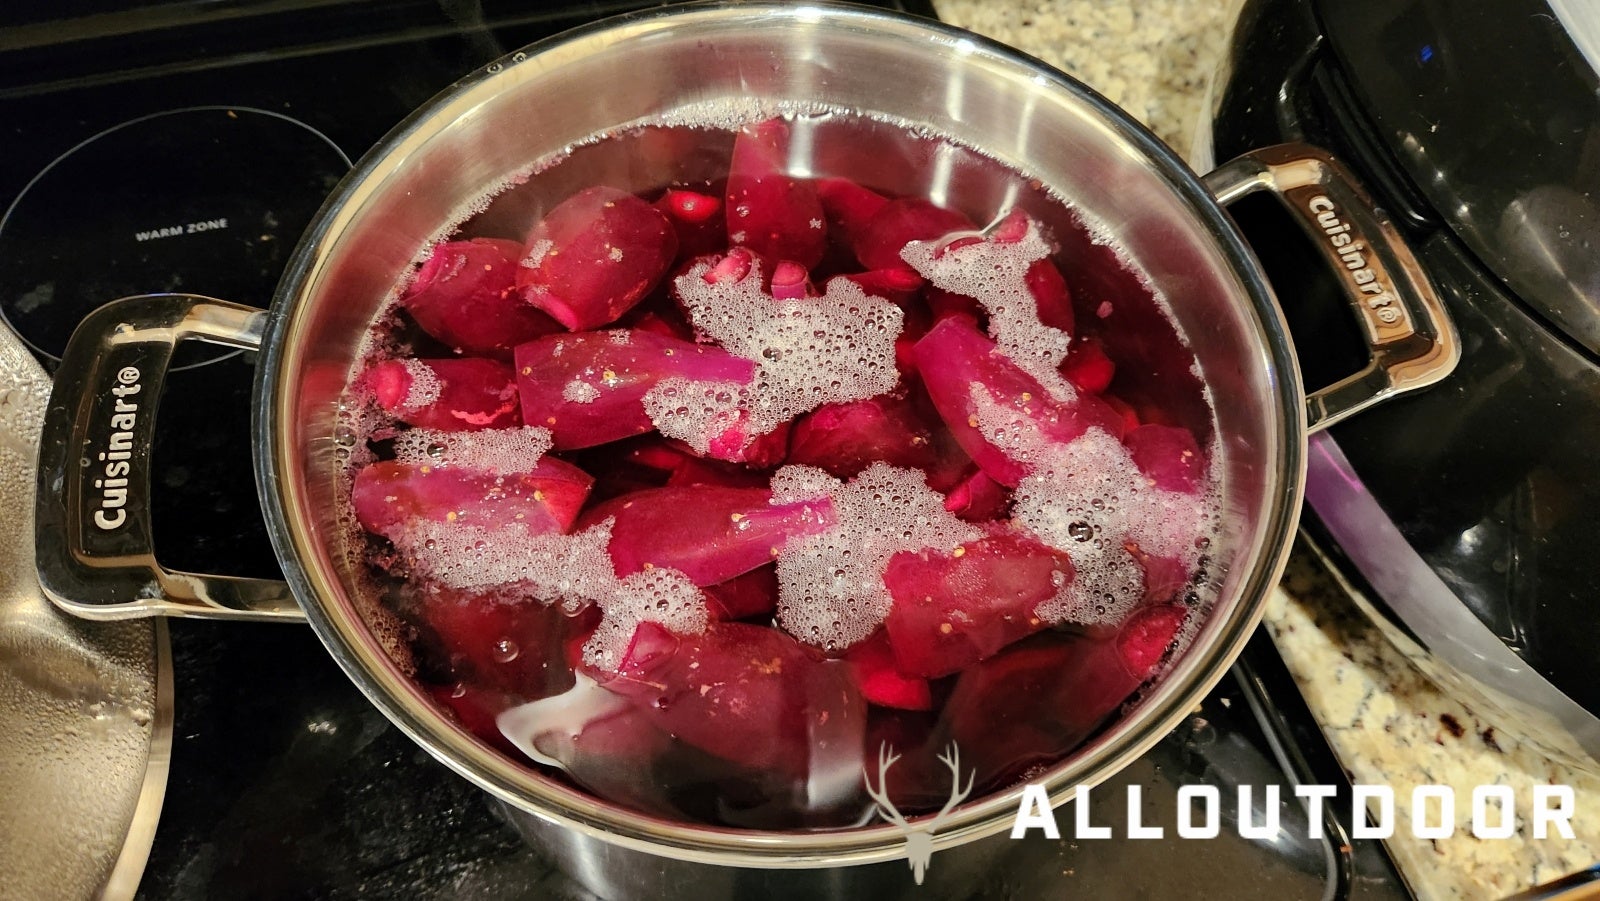 Surf n' Turf Topper - How to Make your Own Prickly Pears into Jelly!